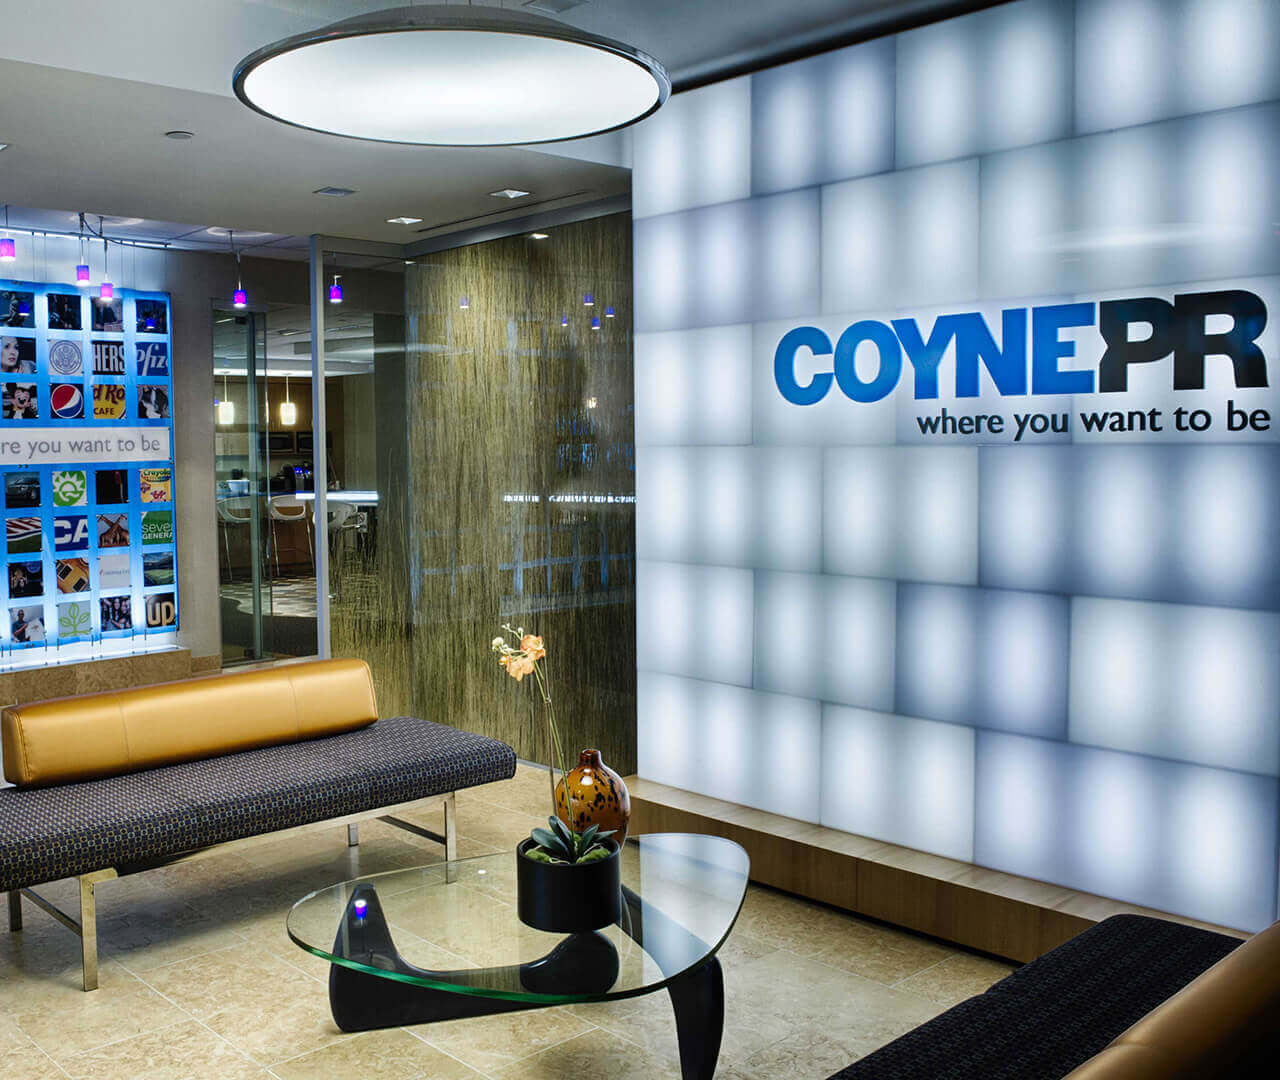 Coyne PR Named One of the Best Places to Work in New Jersey